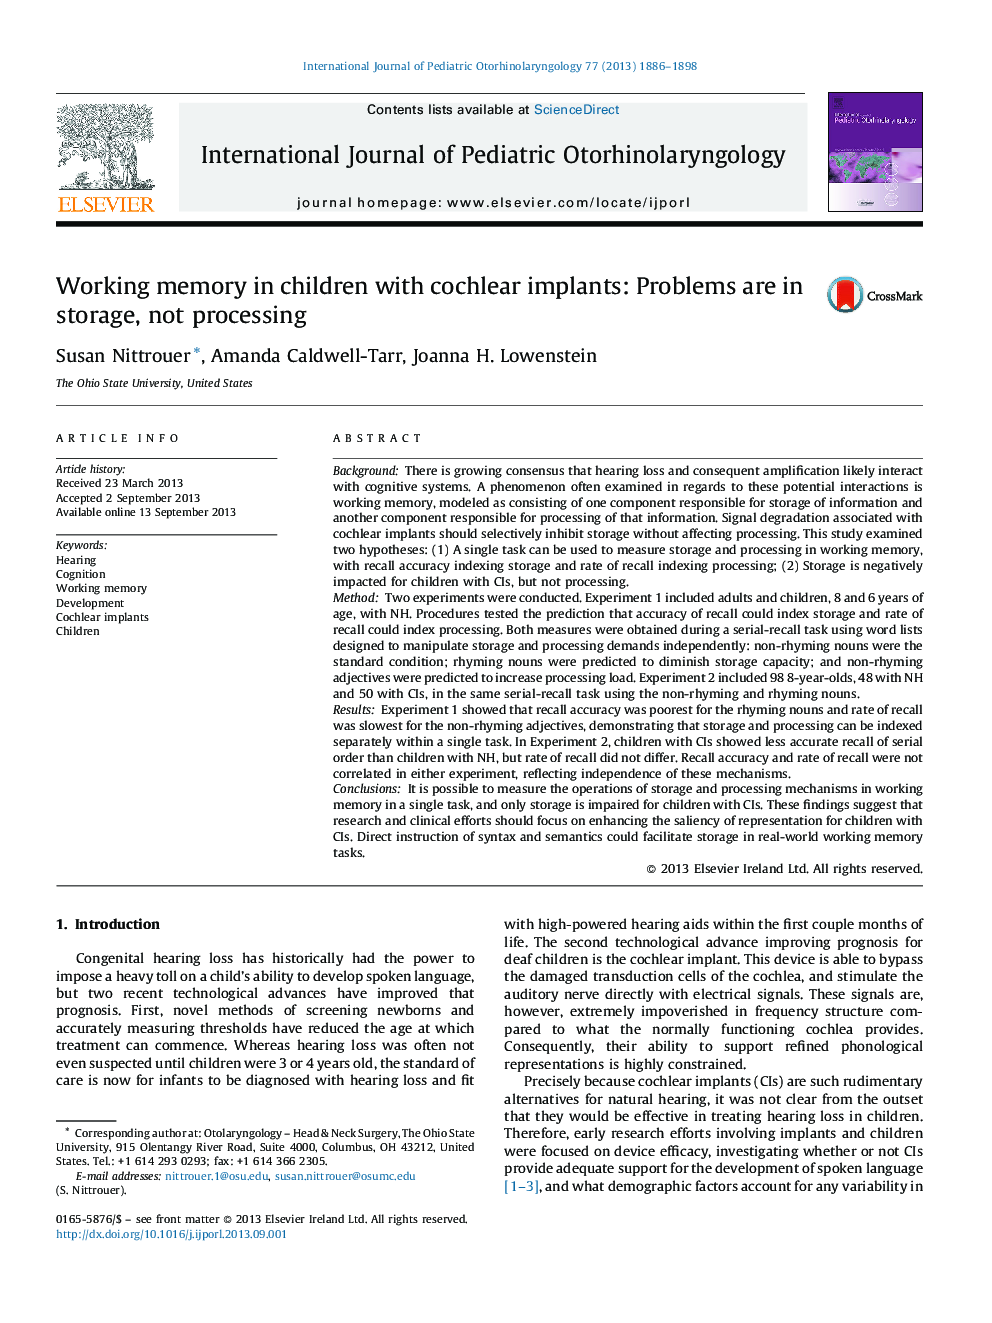 Working memory in children with cochlear implants: Problems are in storage, not processing